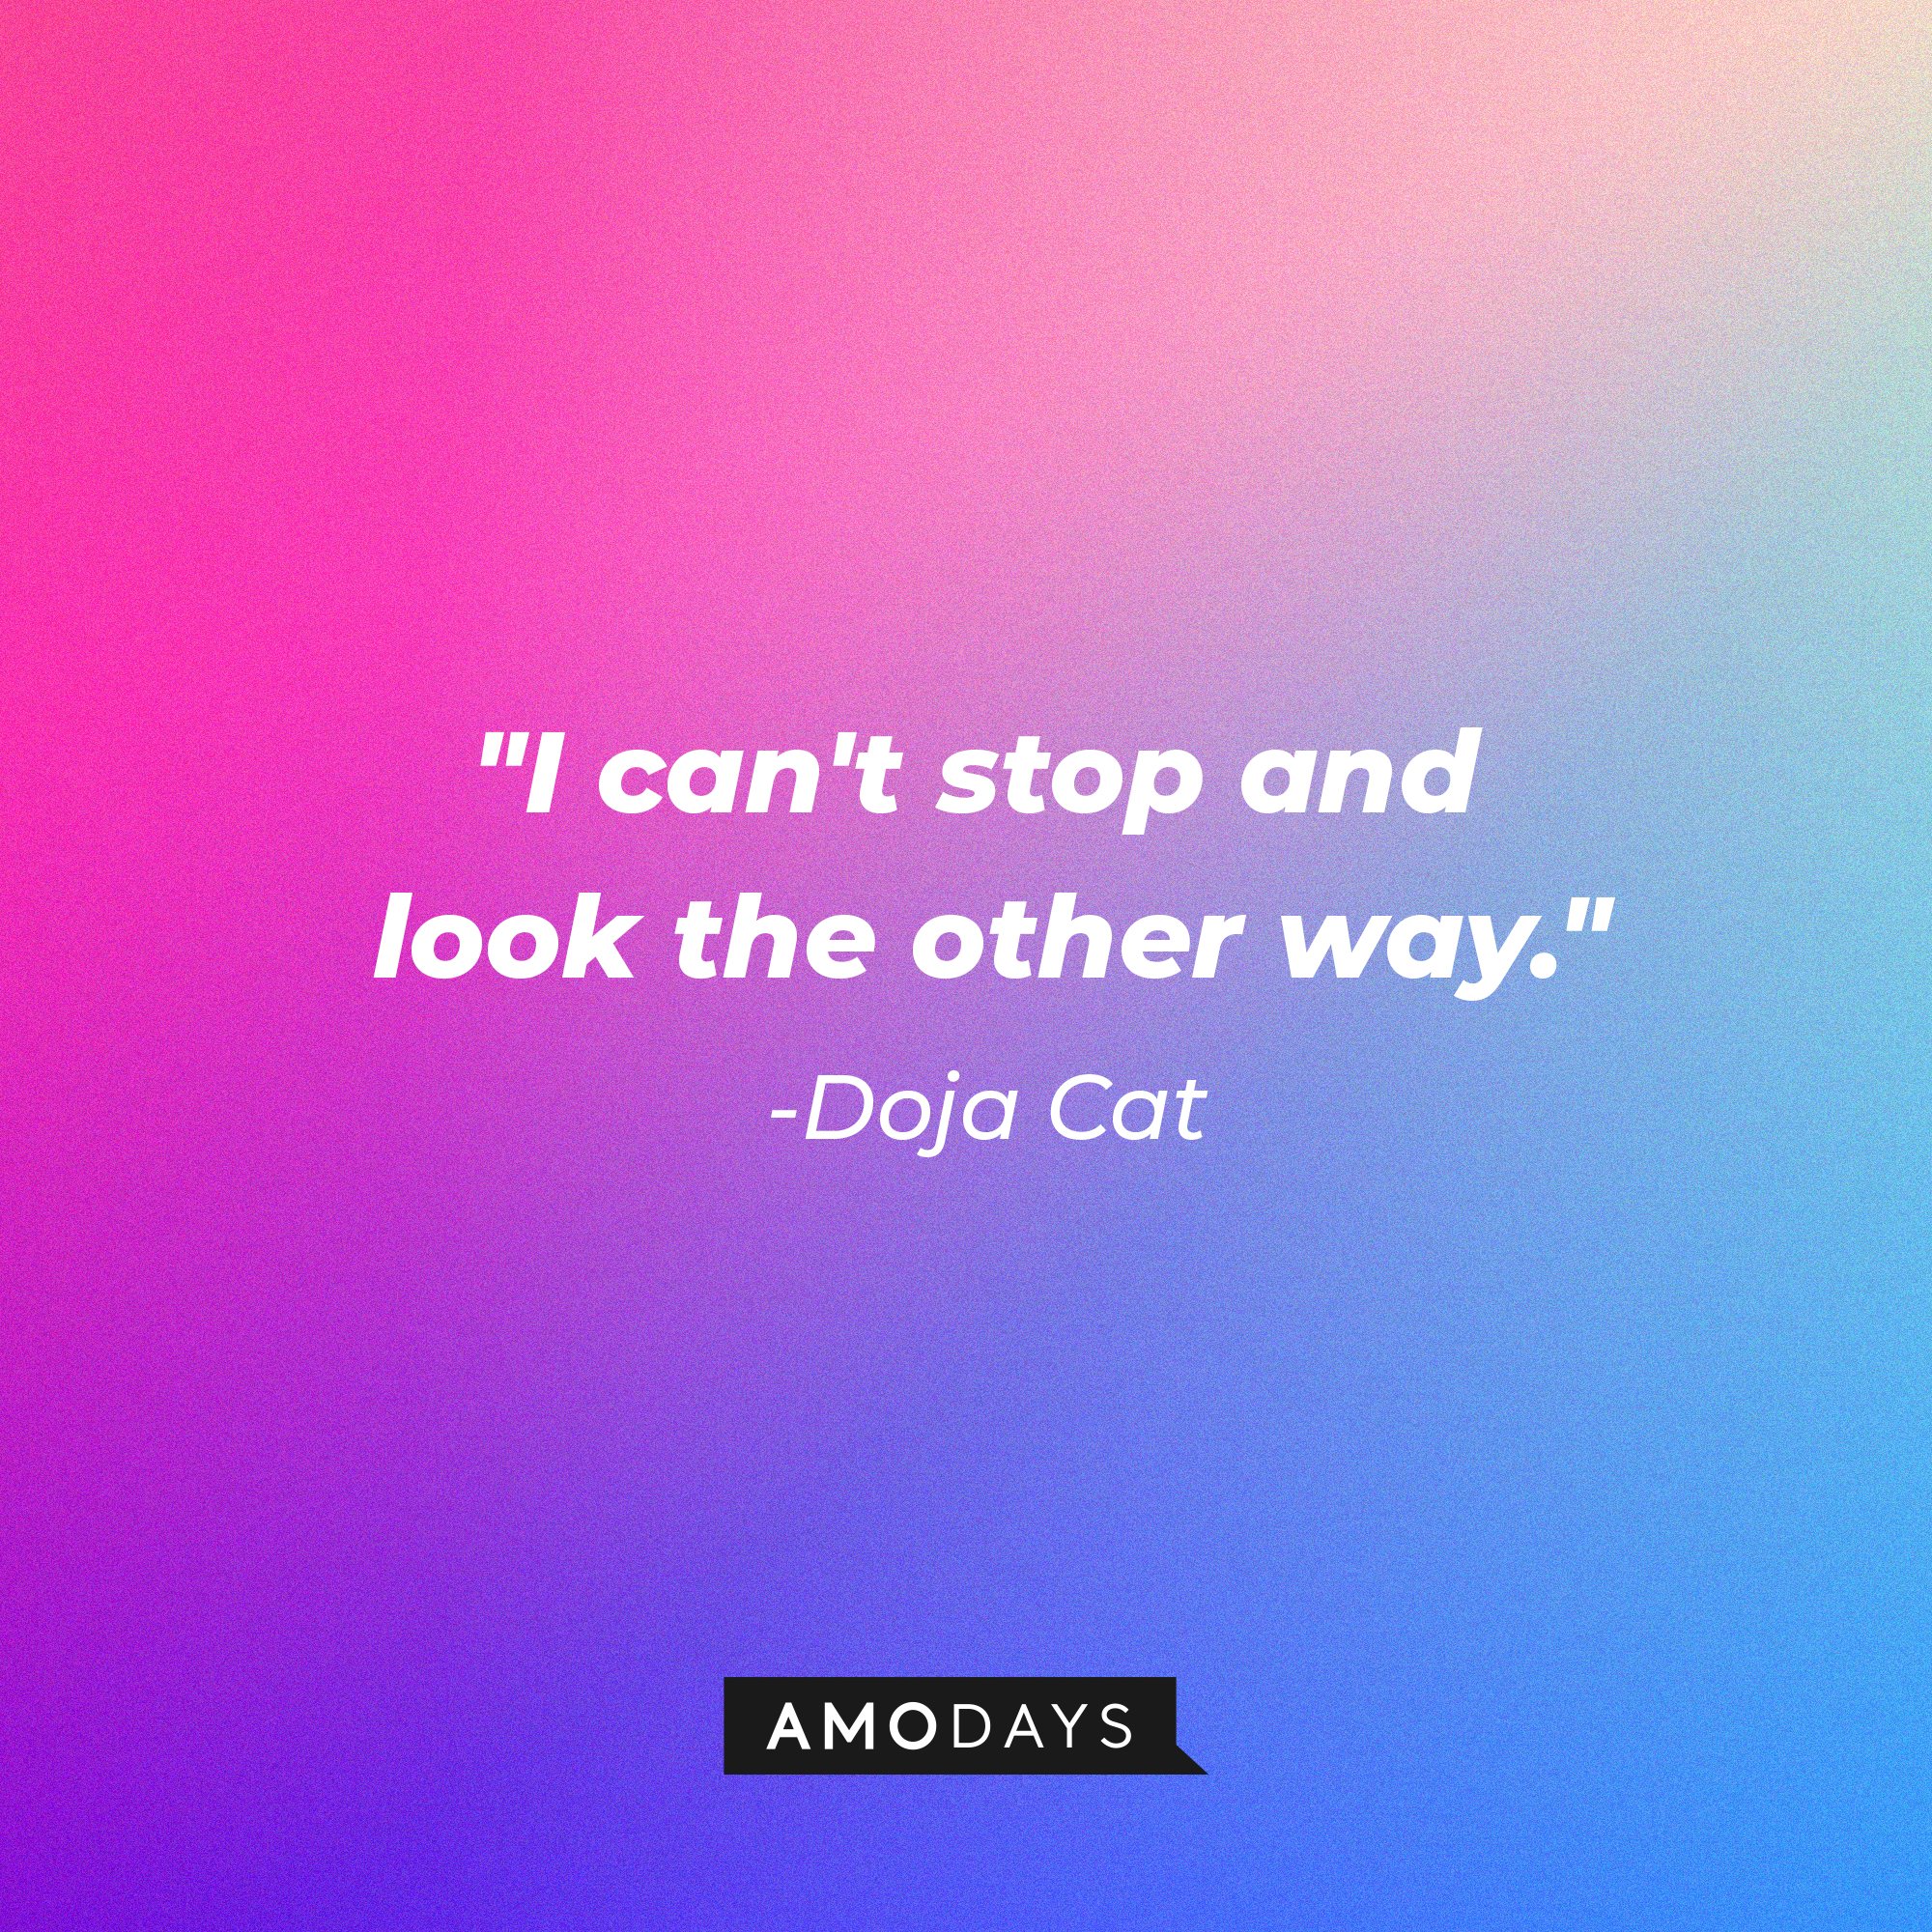 Doja Cat's quote: "I can't stop and look the other way." | Image: AmoDays